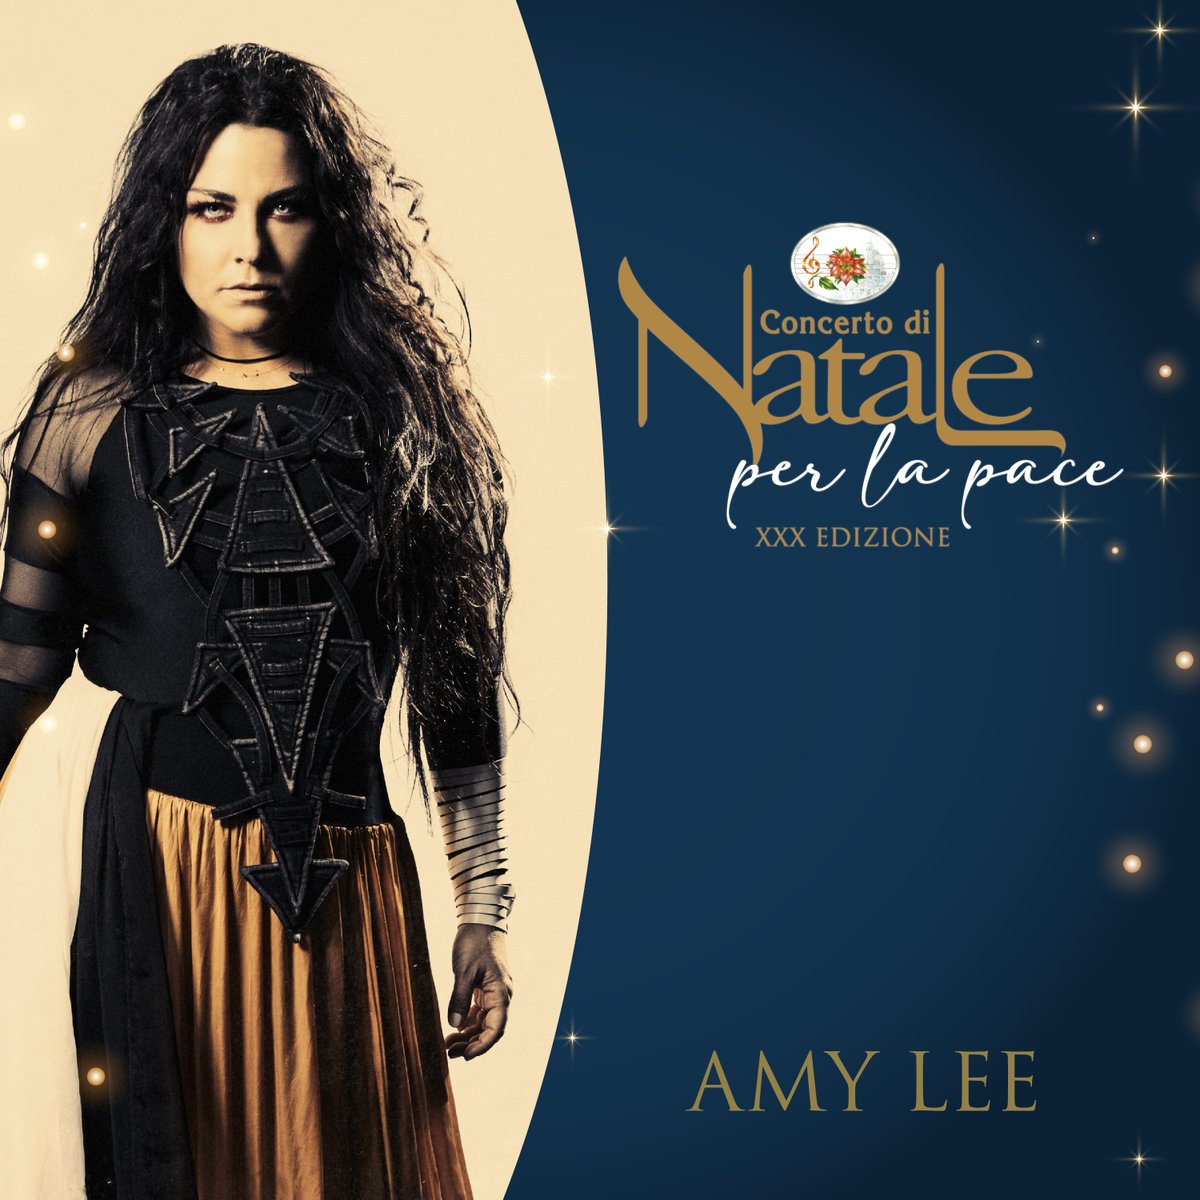 Reminding my friends in Italy that I’ll be performing at Concert di Natale in Rome on December 17th. This will be broadcast on New Year’s Day on CANALE 5 for those of you who can’t make it.